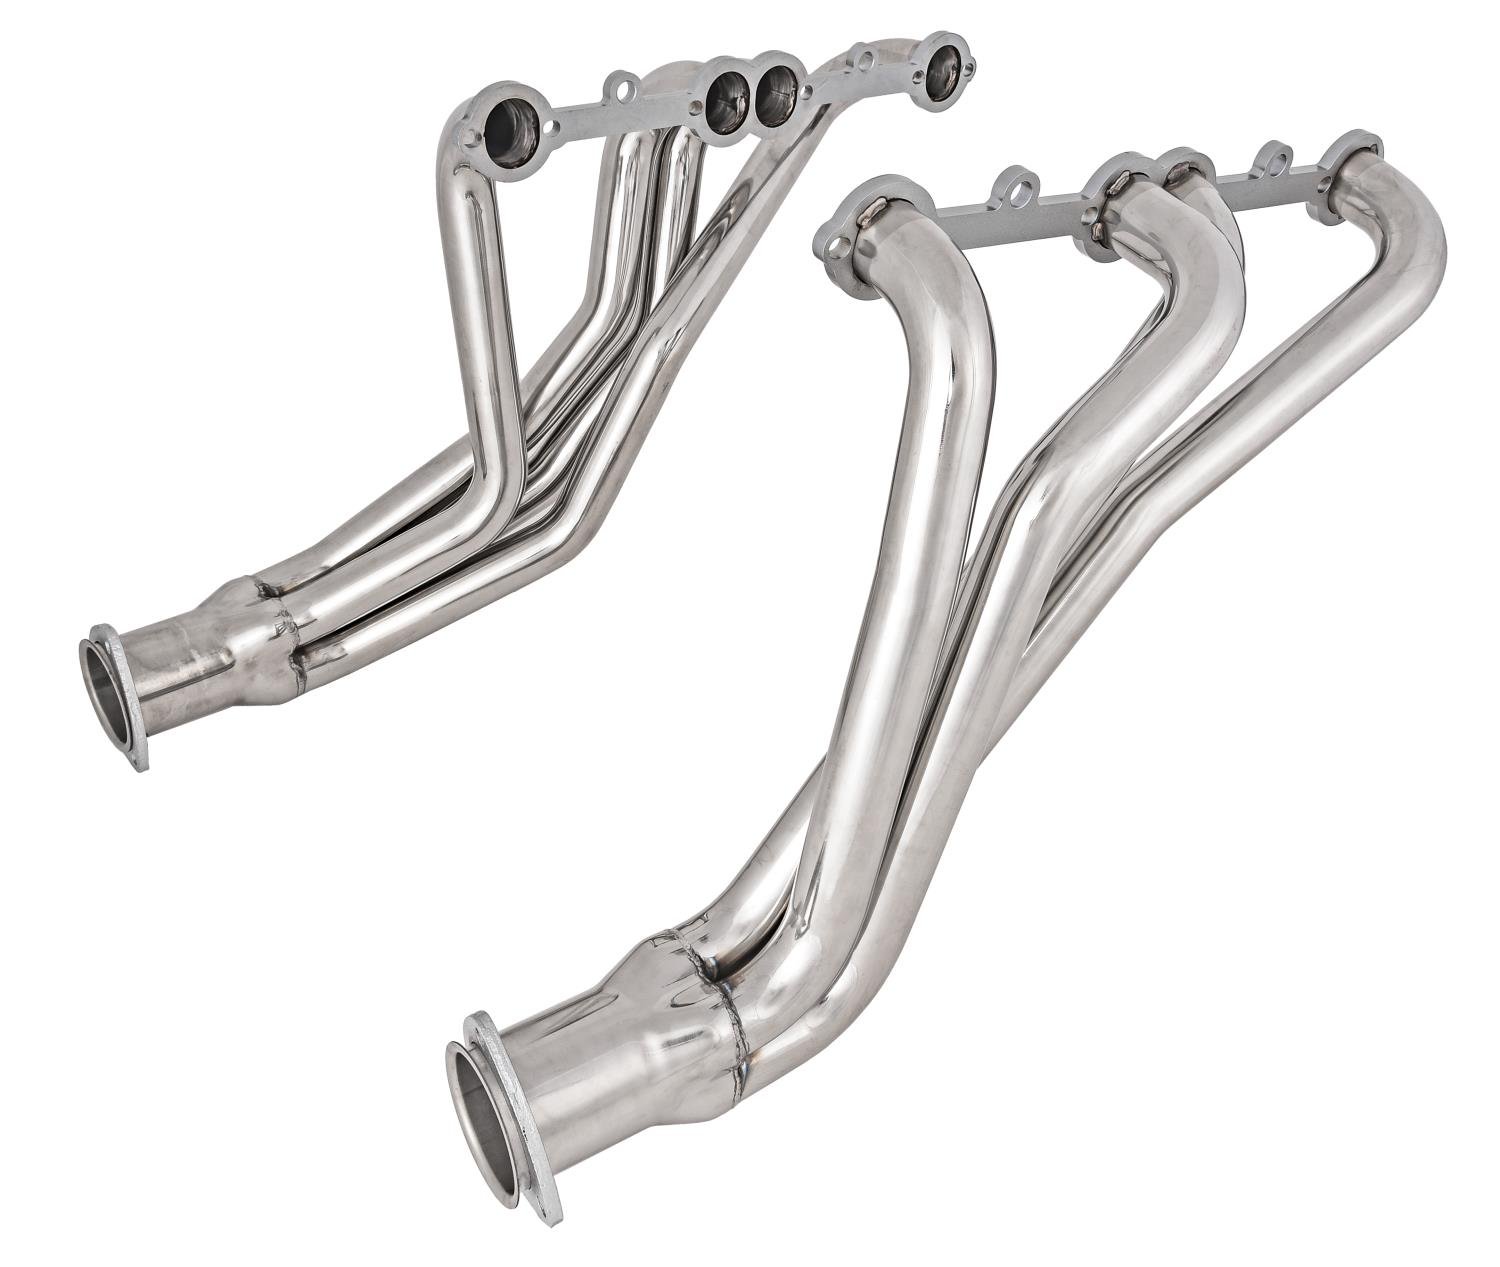 Stainless Steel Long Tube Headers for 1966-1991 GM Truck with Small Block Chevy 265-400 ci [Polished Finish]